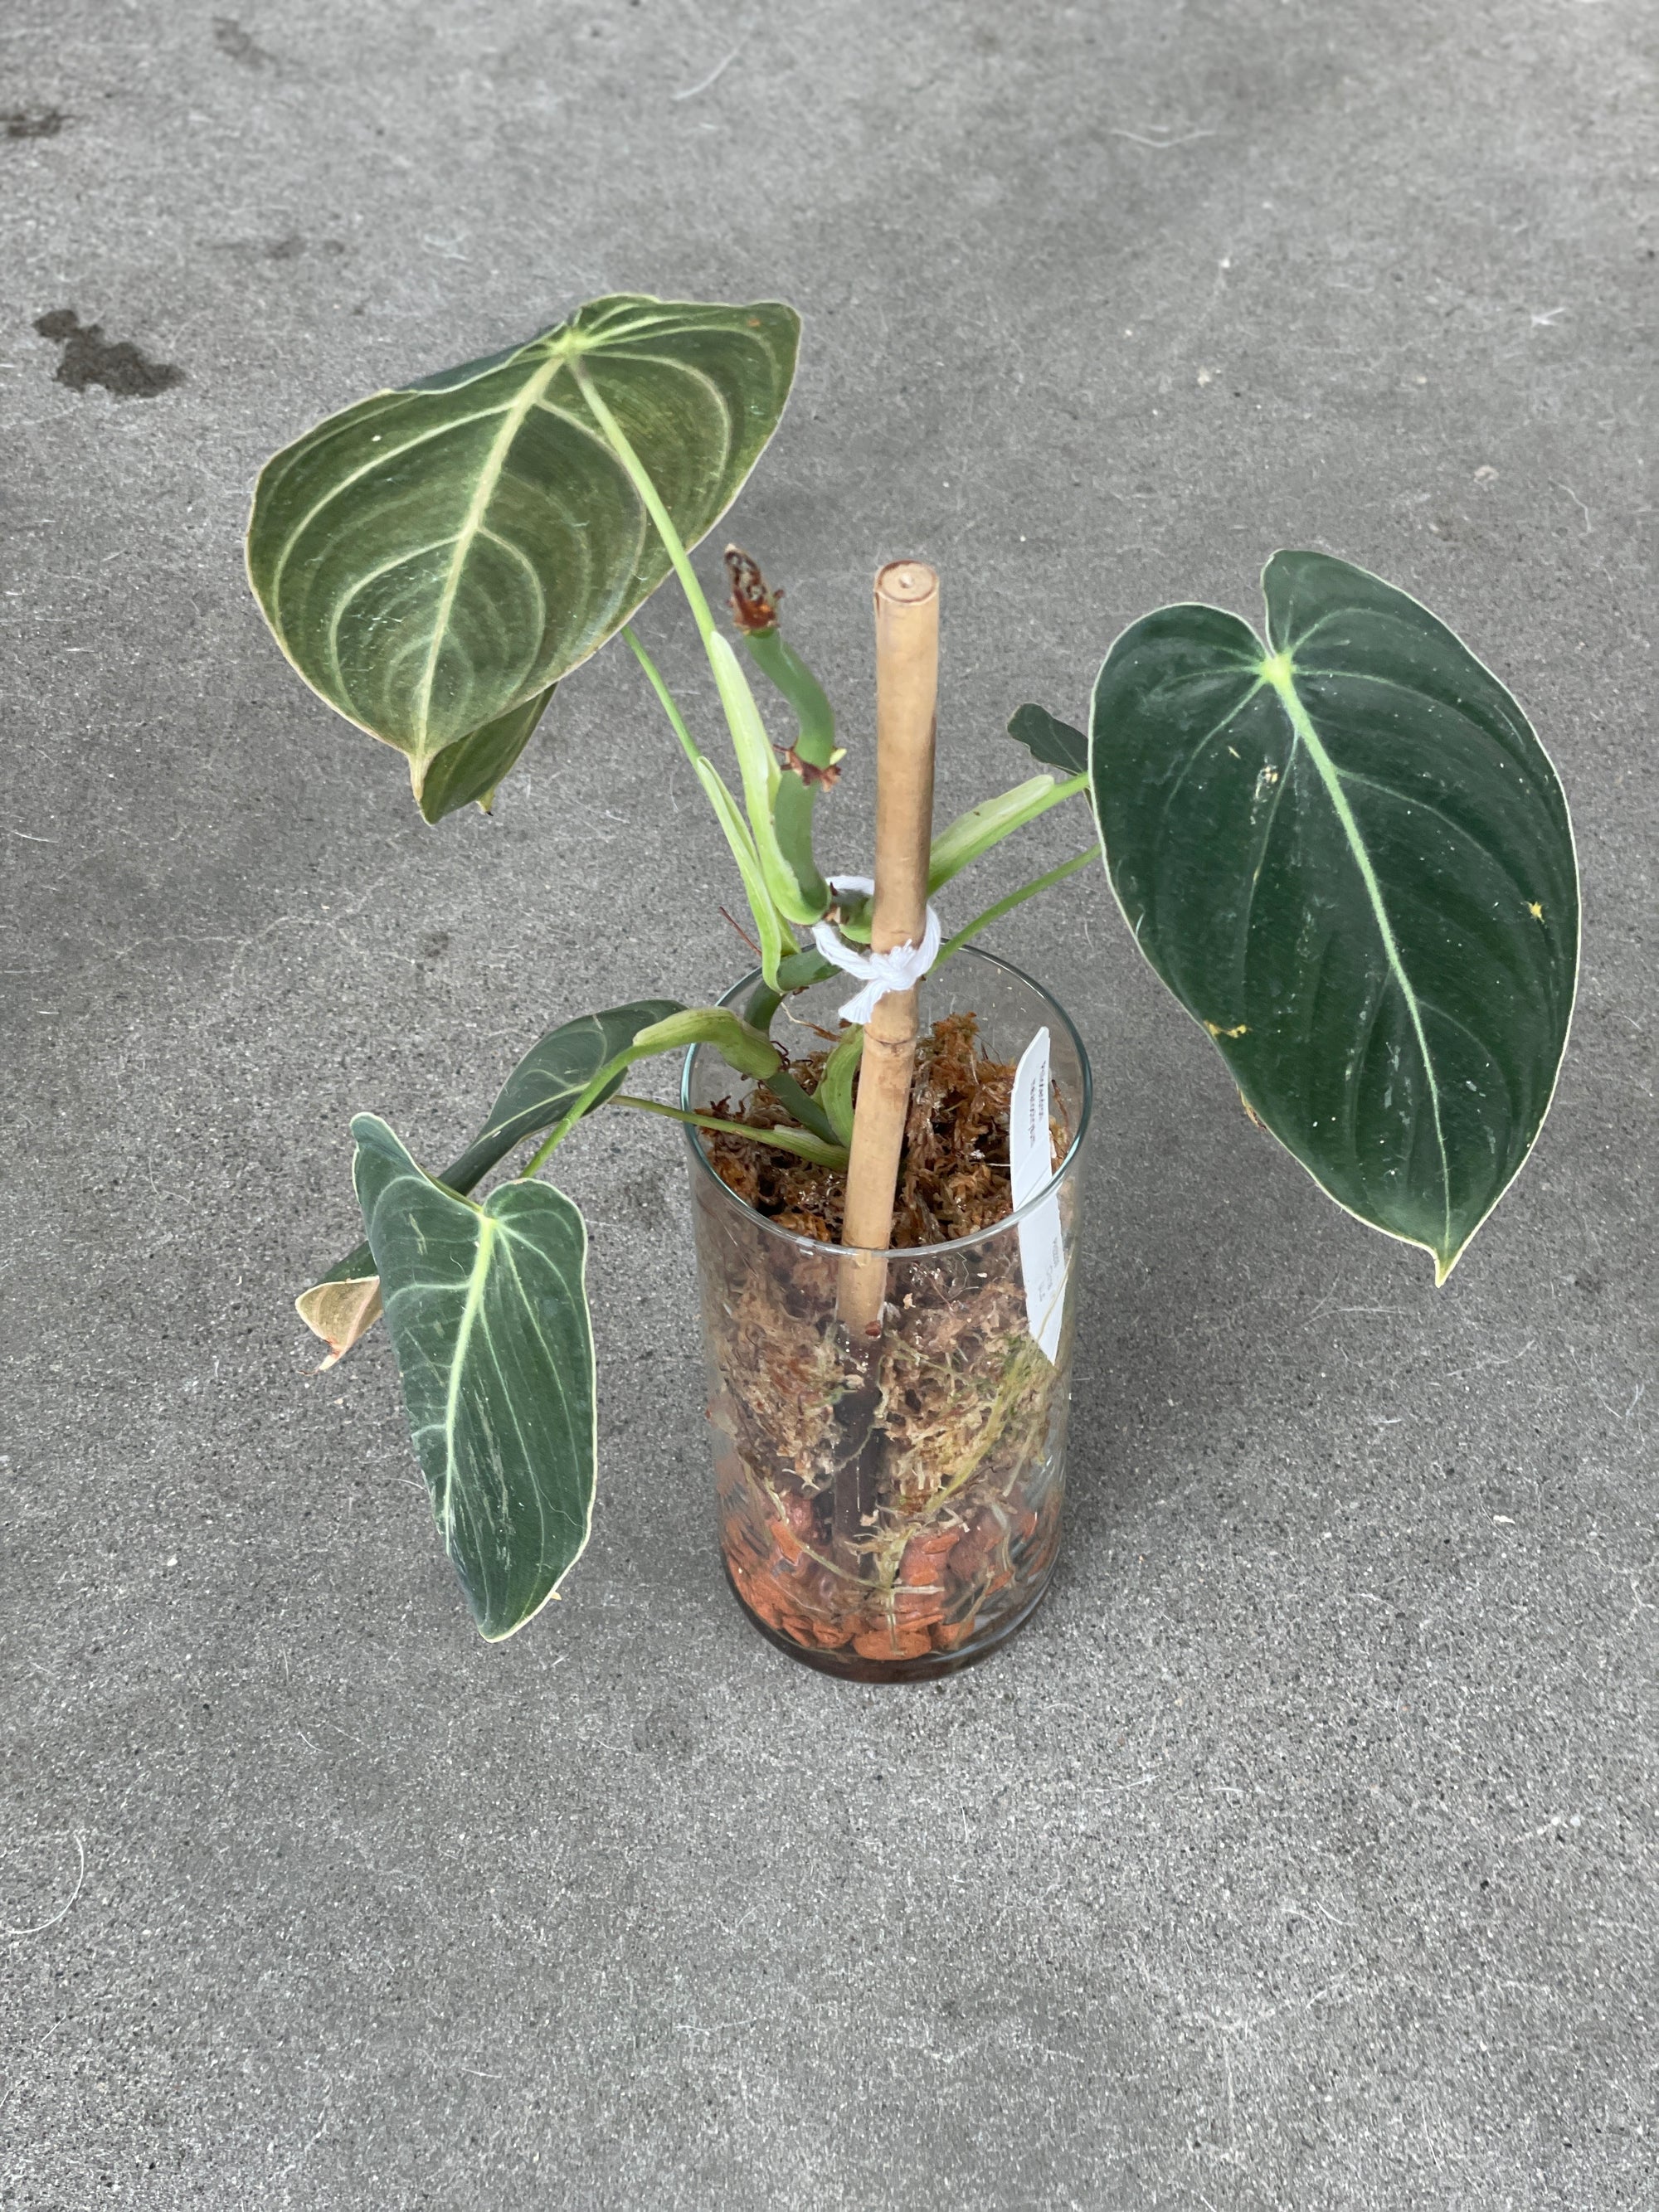 Philodendron Melanochrysum Green Leaves leaning on a banboo pole for support. Potted in a glass vase with moss and leca. 